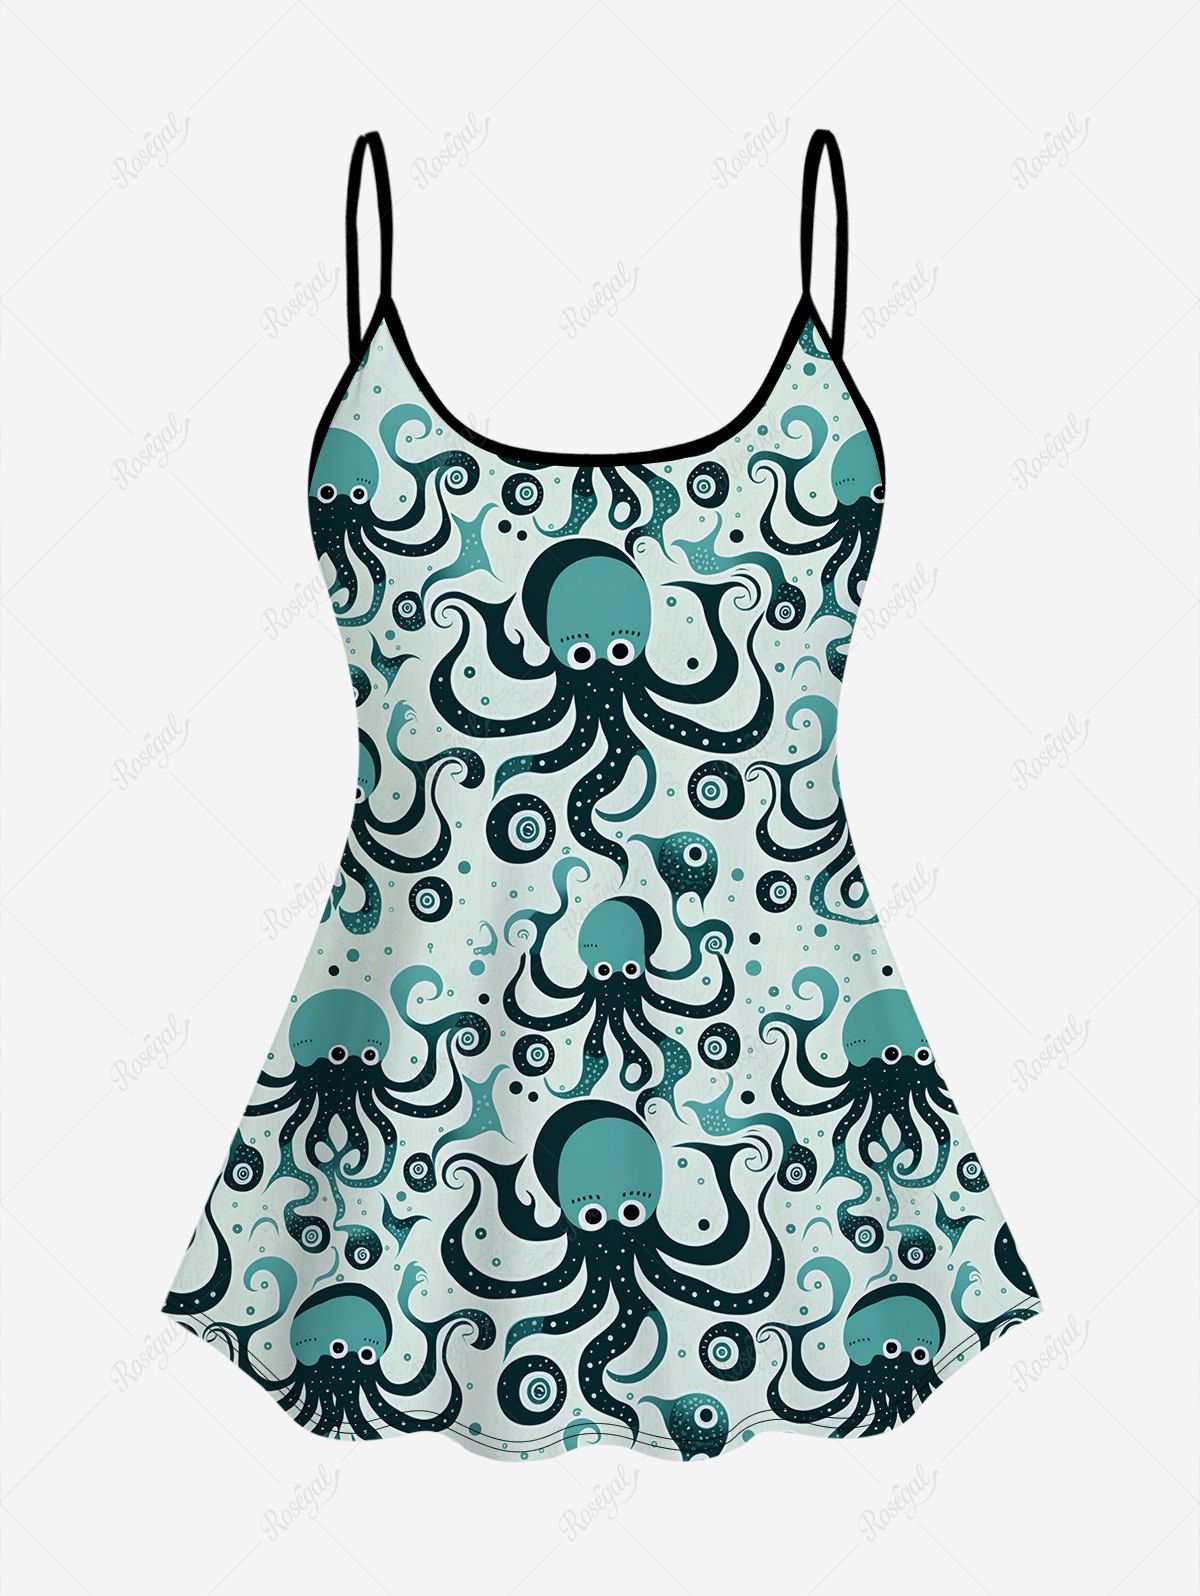 Sale Gothic Octopus Printed Tankini Top (Adjustable Shoulder Strap)  